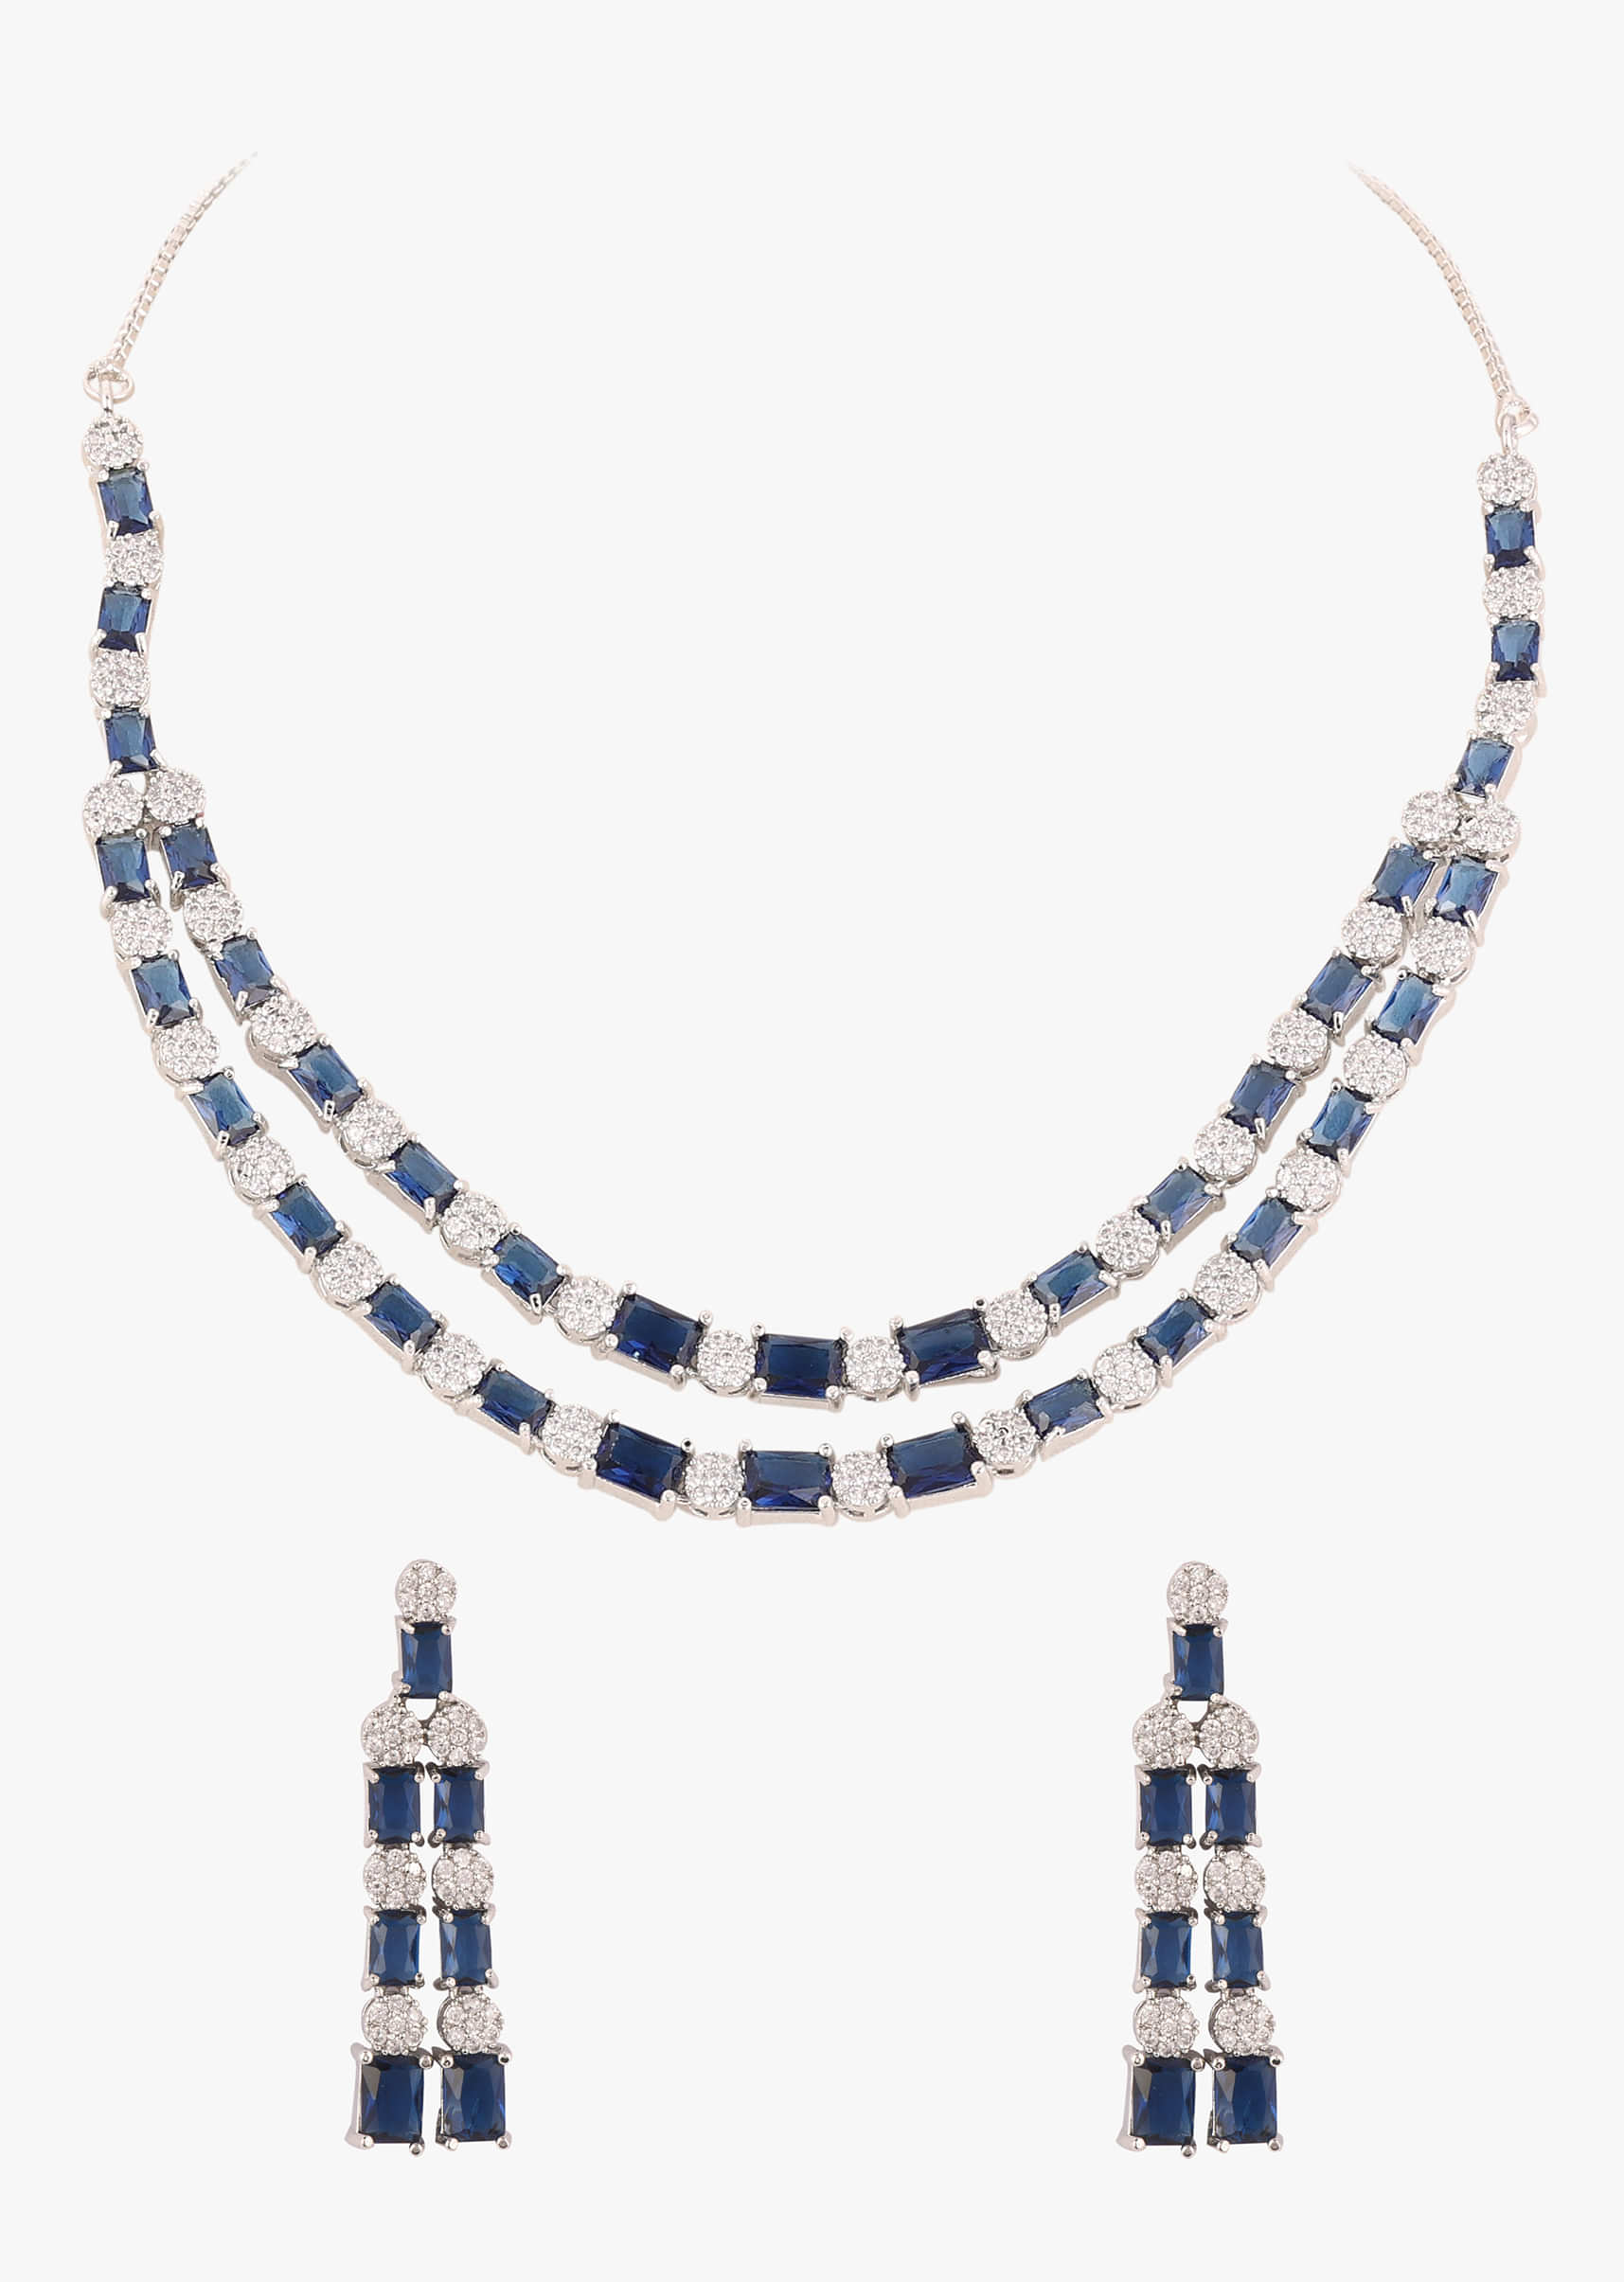 Silver Plated Diamond Necklace Set With Navy Blue Stones